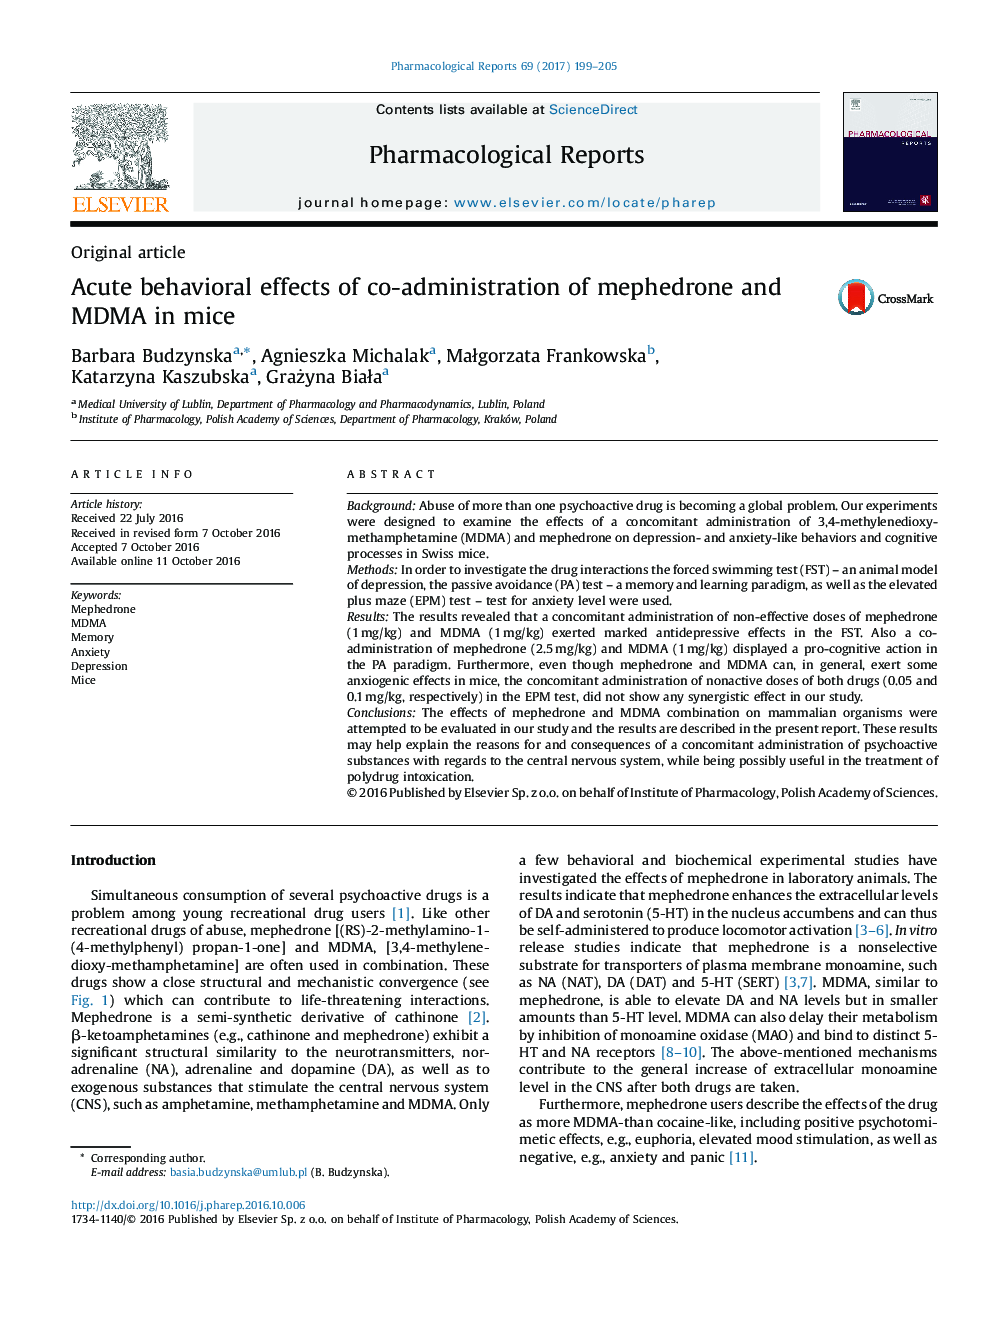 Original articleAcute behavioral effects of co-administration of mephedrone and MDMA in mice